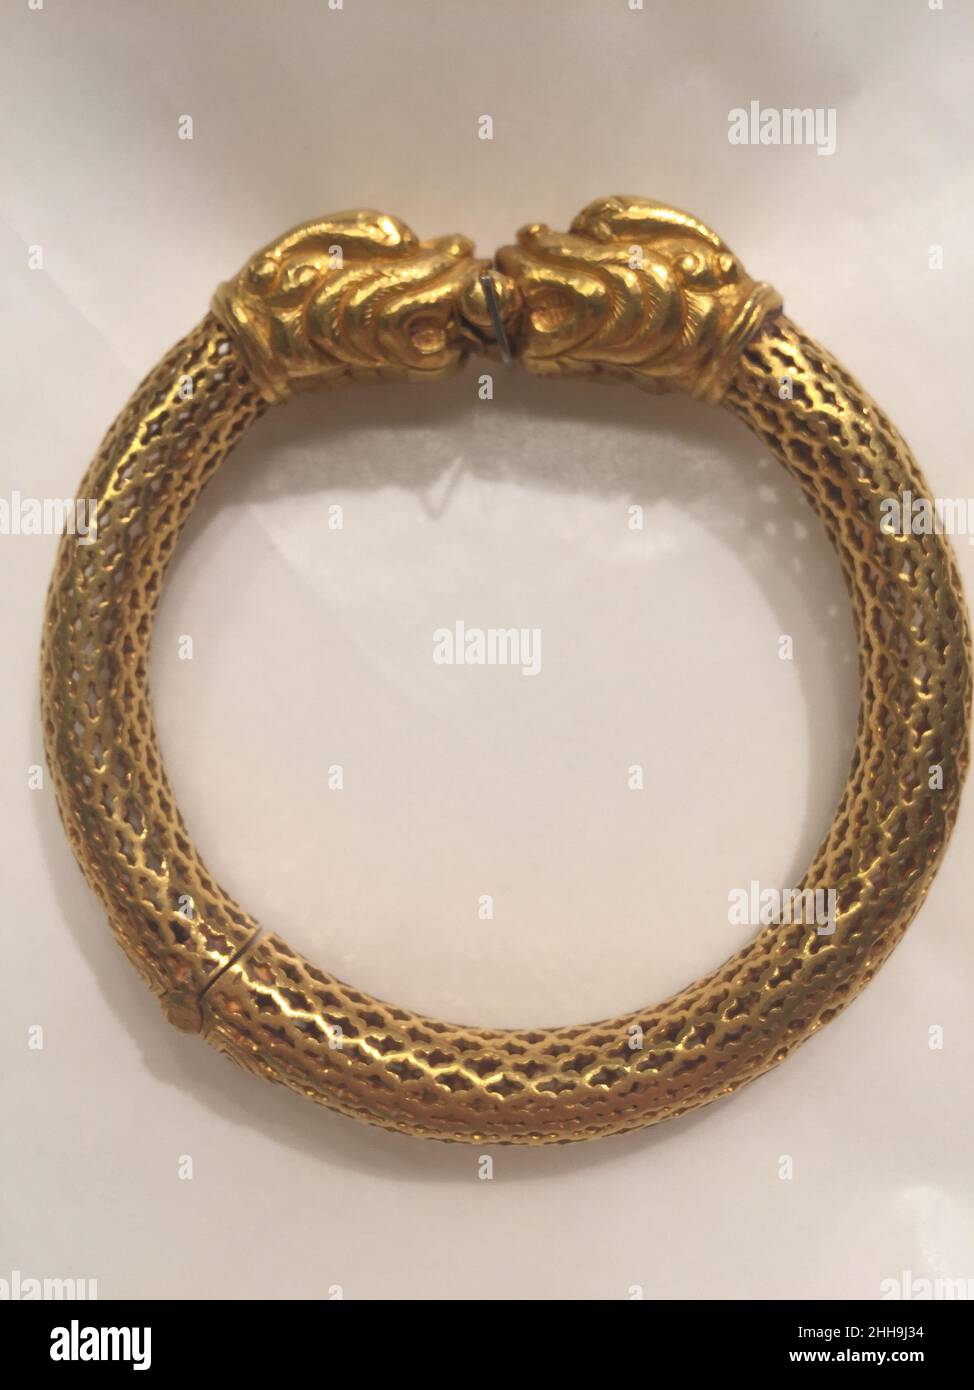 Bracelet, One of a Pair 18th century This gold bracelet is one of pair (along with 15.95.33) and has been fabricated in openwork gold, and culminates with two facing Makara or dragon heads, which also serve as its clasp. Small metal pellets within the bracelet jingle when it is moved, adding a musical quality to the beauty of the piece. Such sonorous jewels are sometimes known as jhanjhan. The hinge of this bracelet is inscribed with the Chinese Shou character (longetivity) in flattened wire.. Bracelet, One of a Pair. 18th century. Gold. Attributed to India. Jewelry Stock Photo